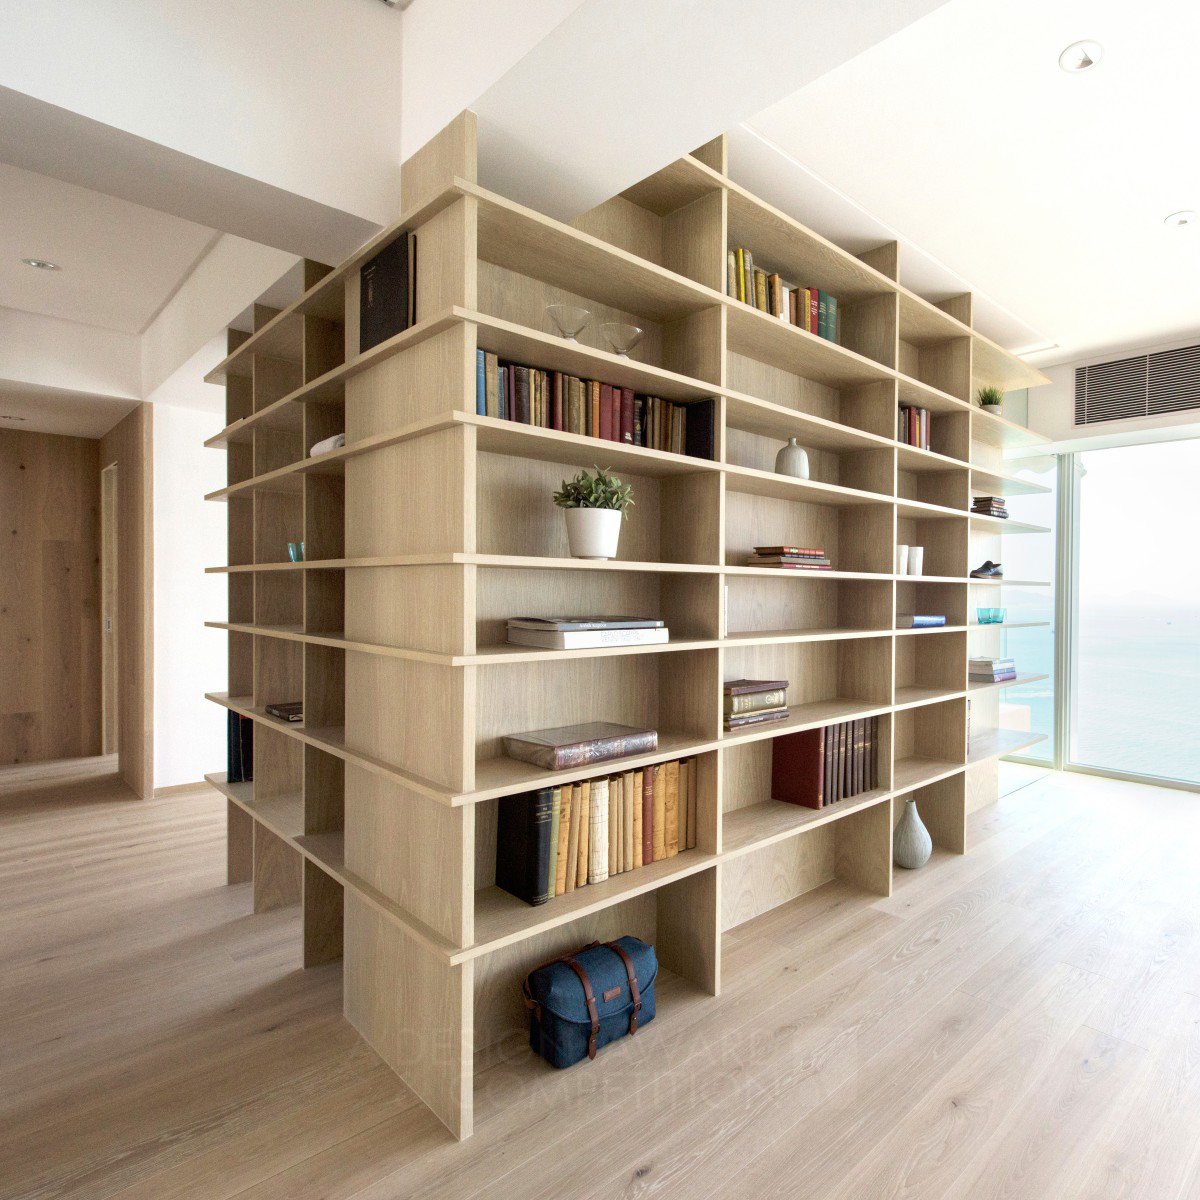 Cabinets Curiosities Residential apartment by Bean Buro